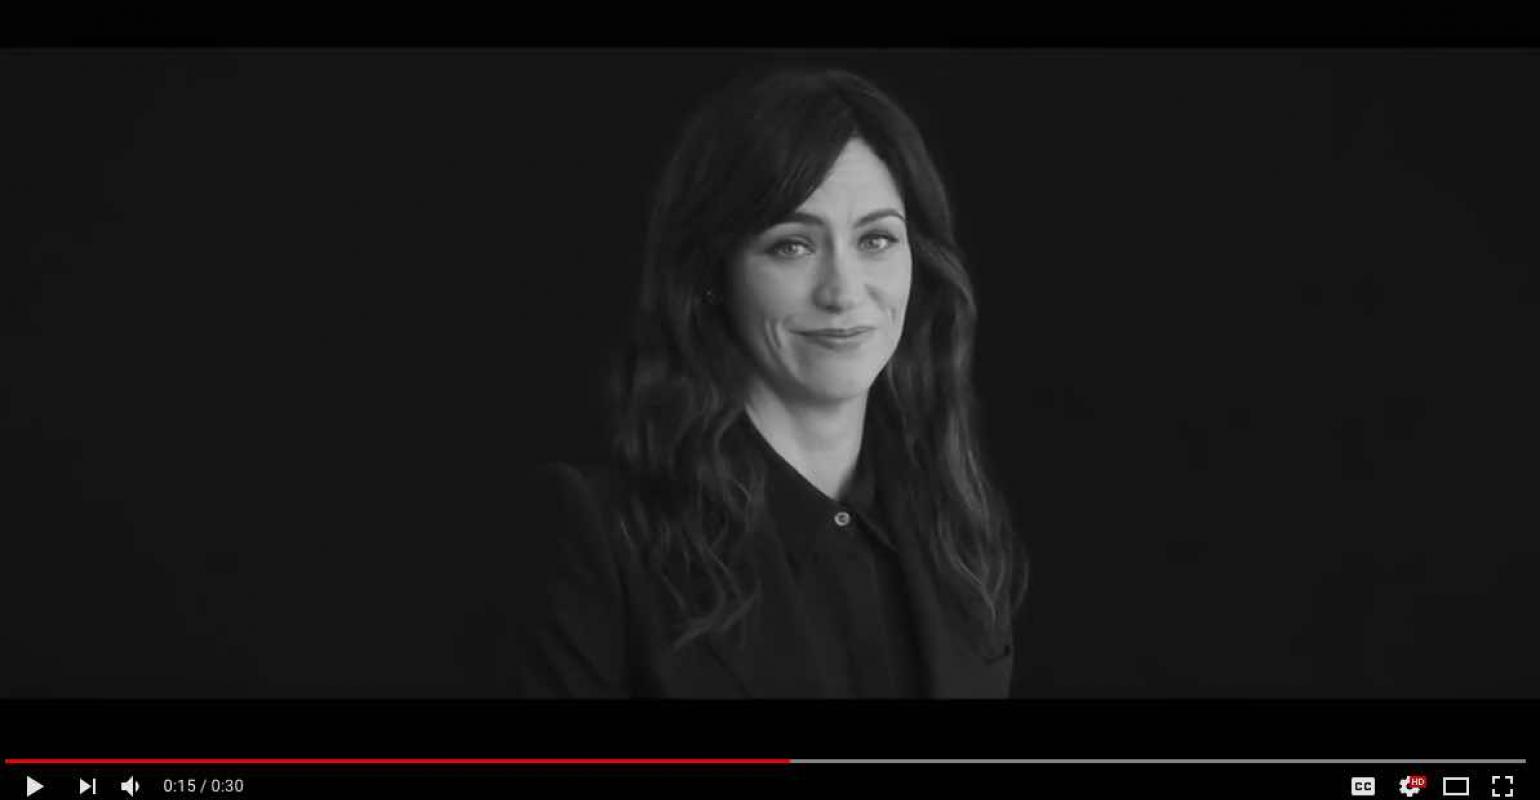 Actress Maggie Siff, most recently starring in the hit HBO series Billions, has appeared in a television commercial for robo-advisor Betterment.